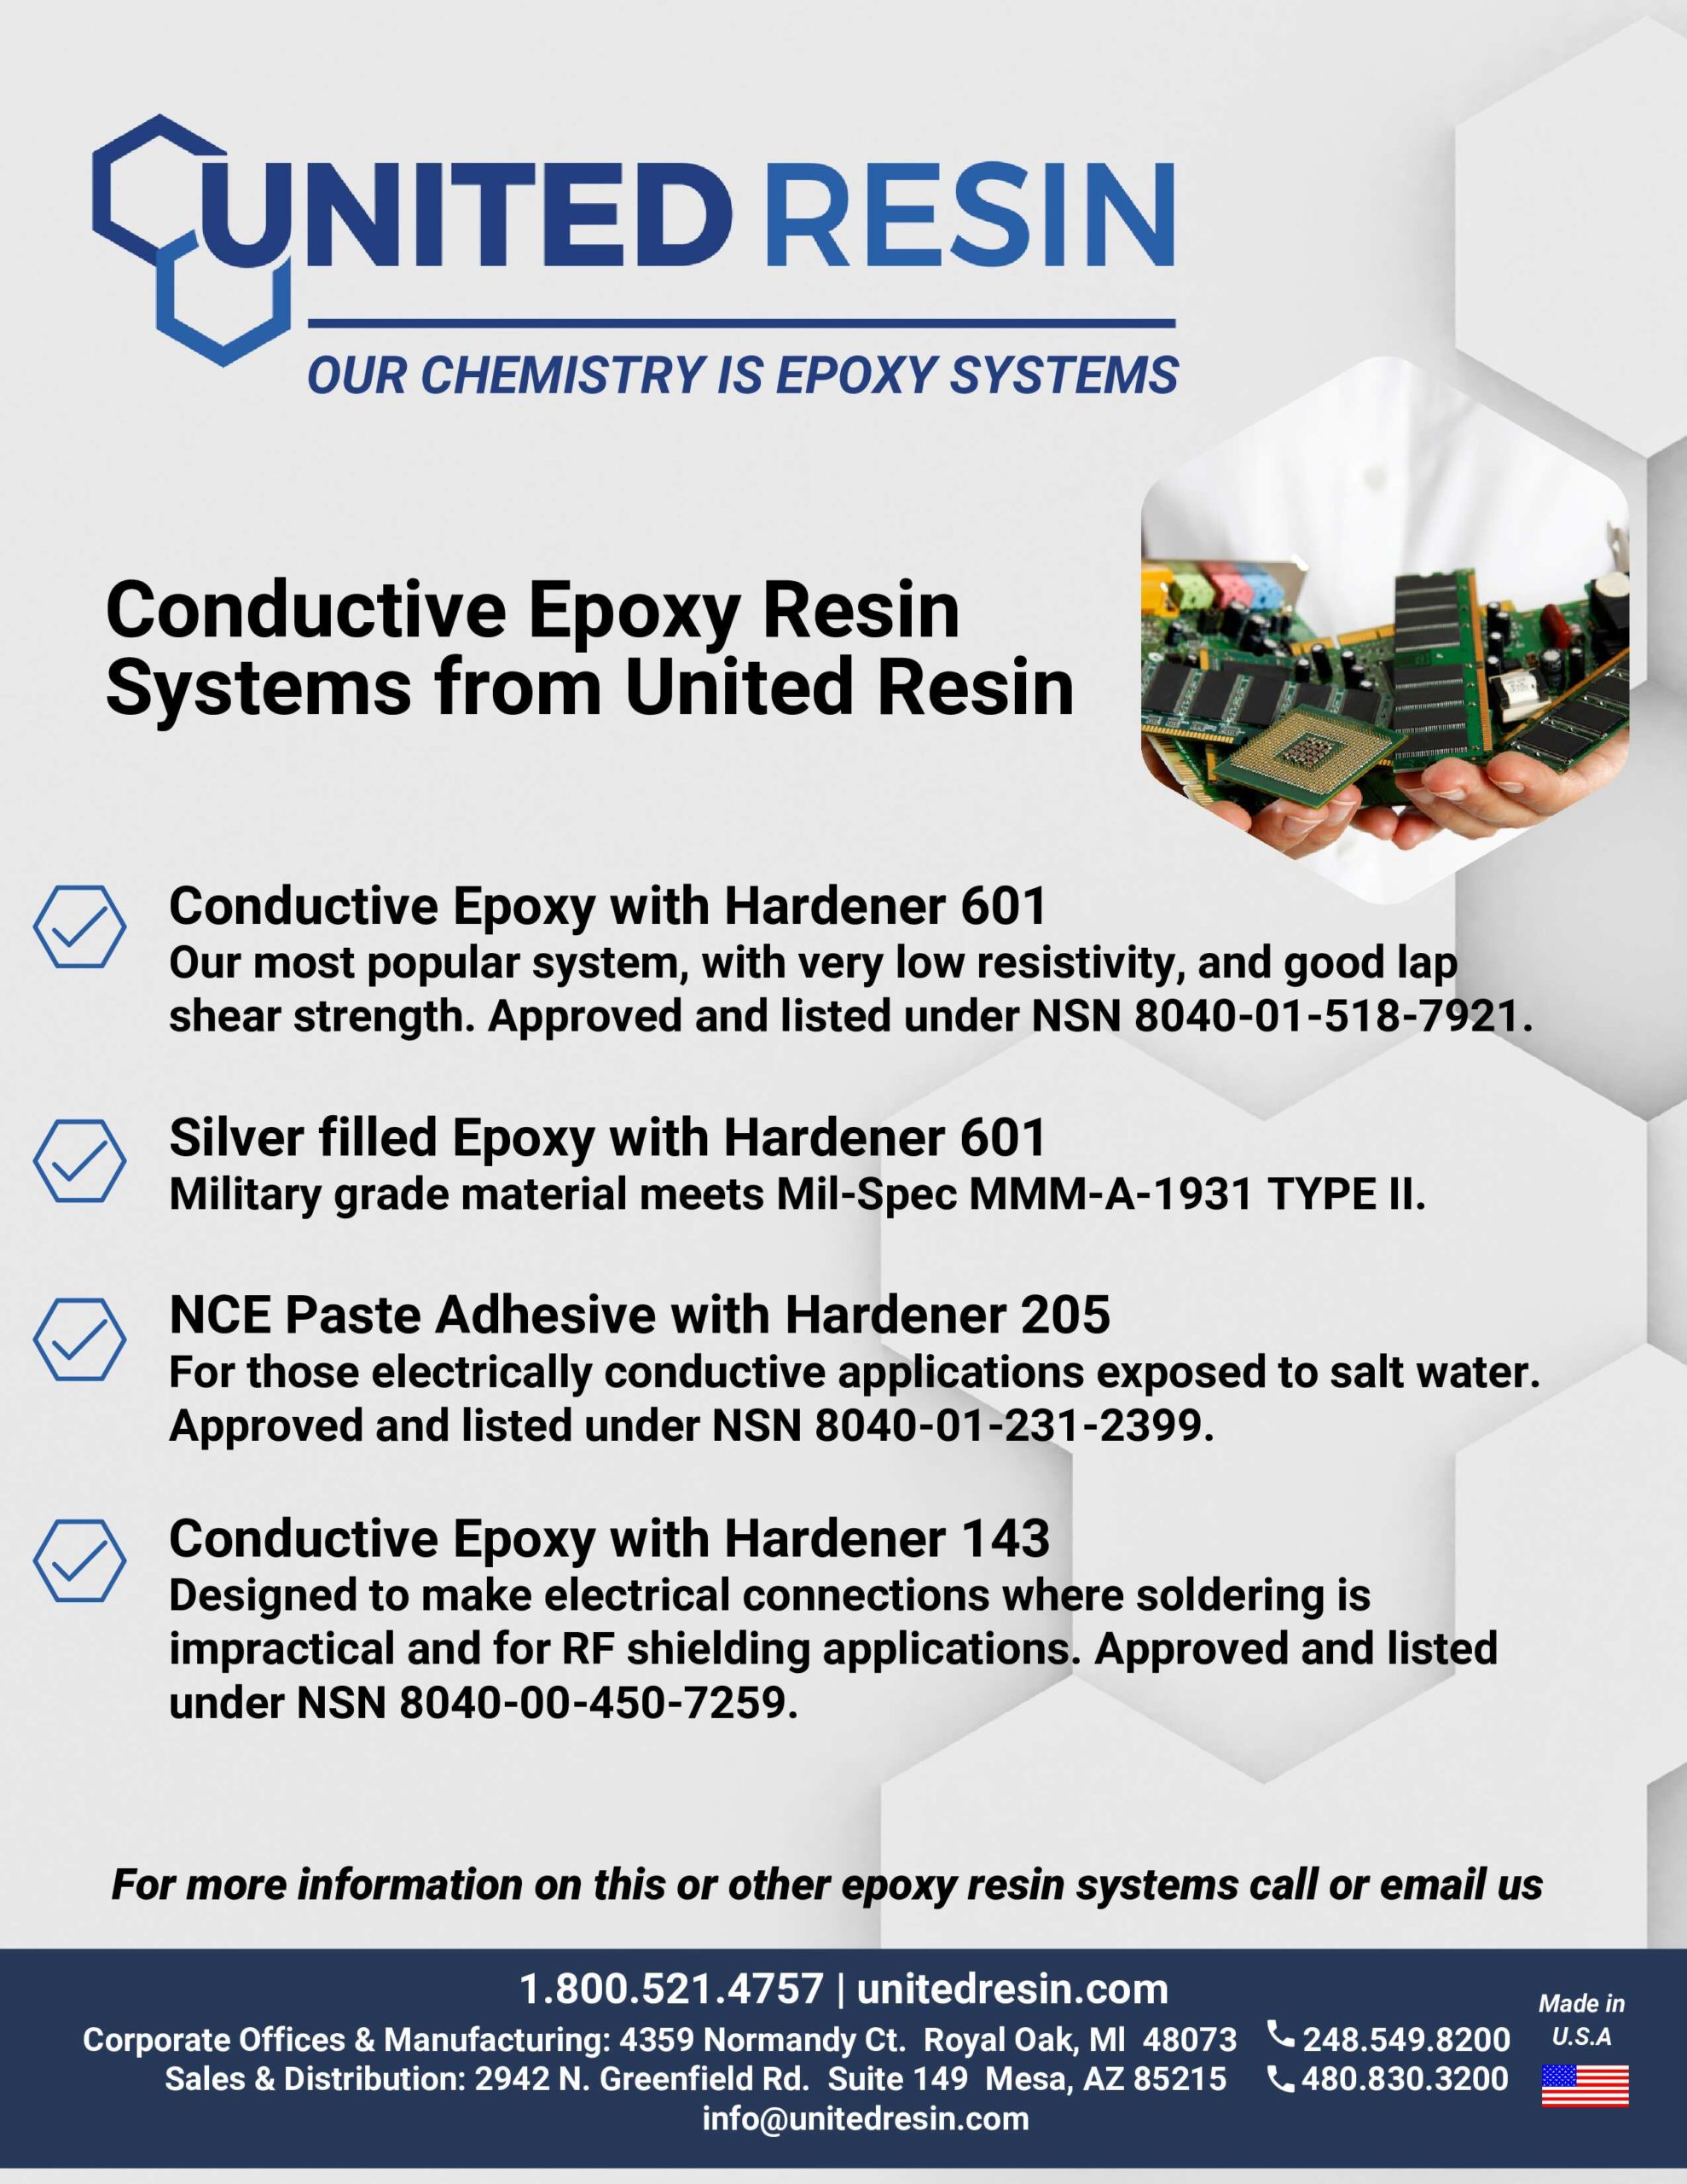 Conductive Epoxy Resin Systems